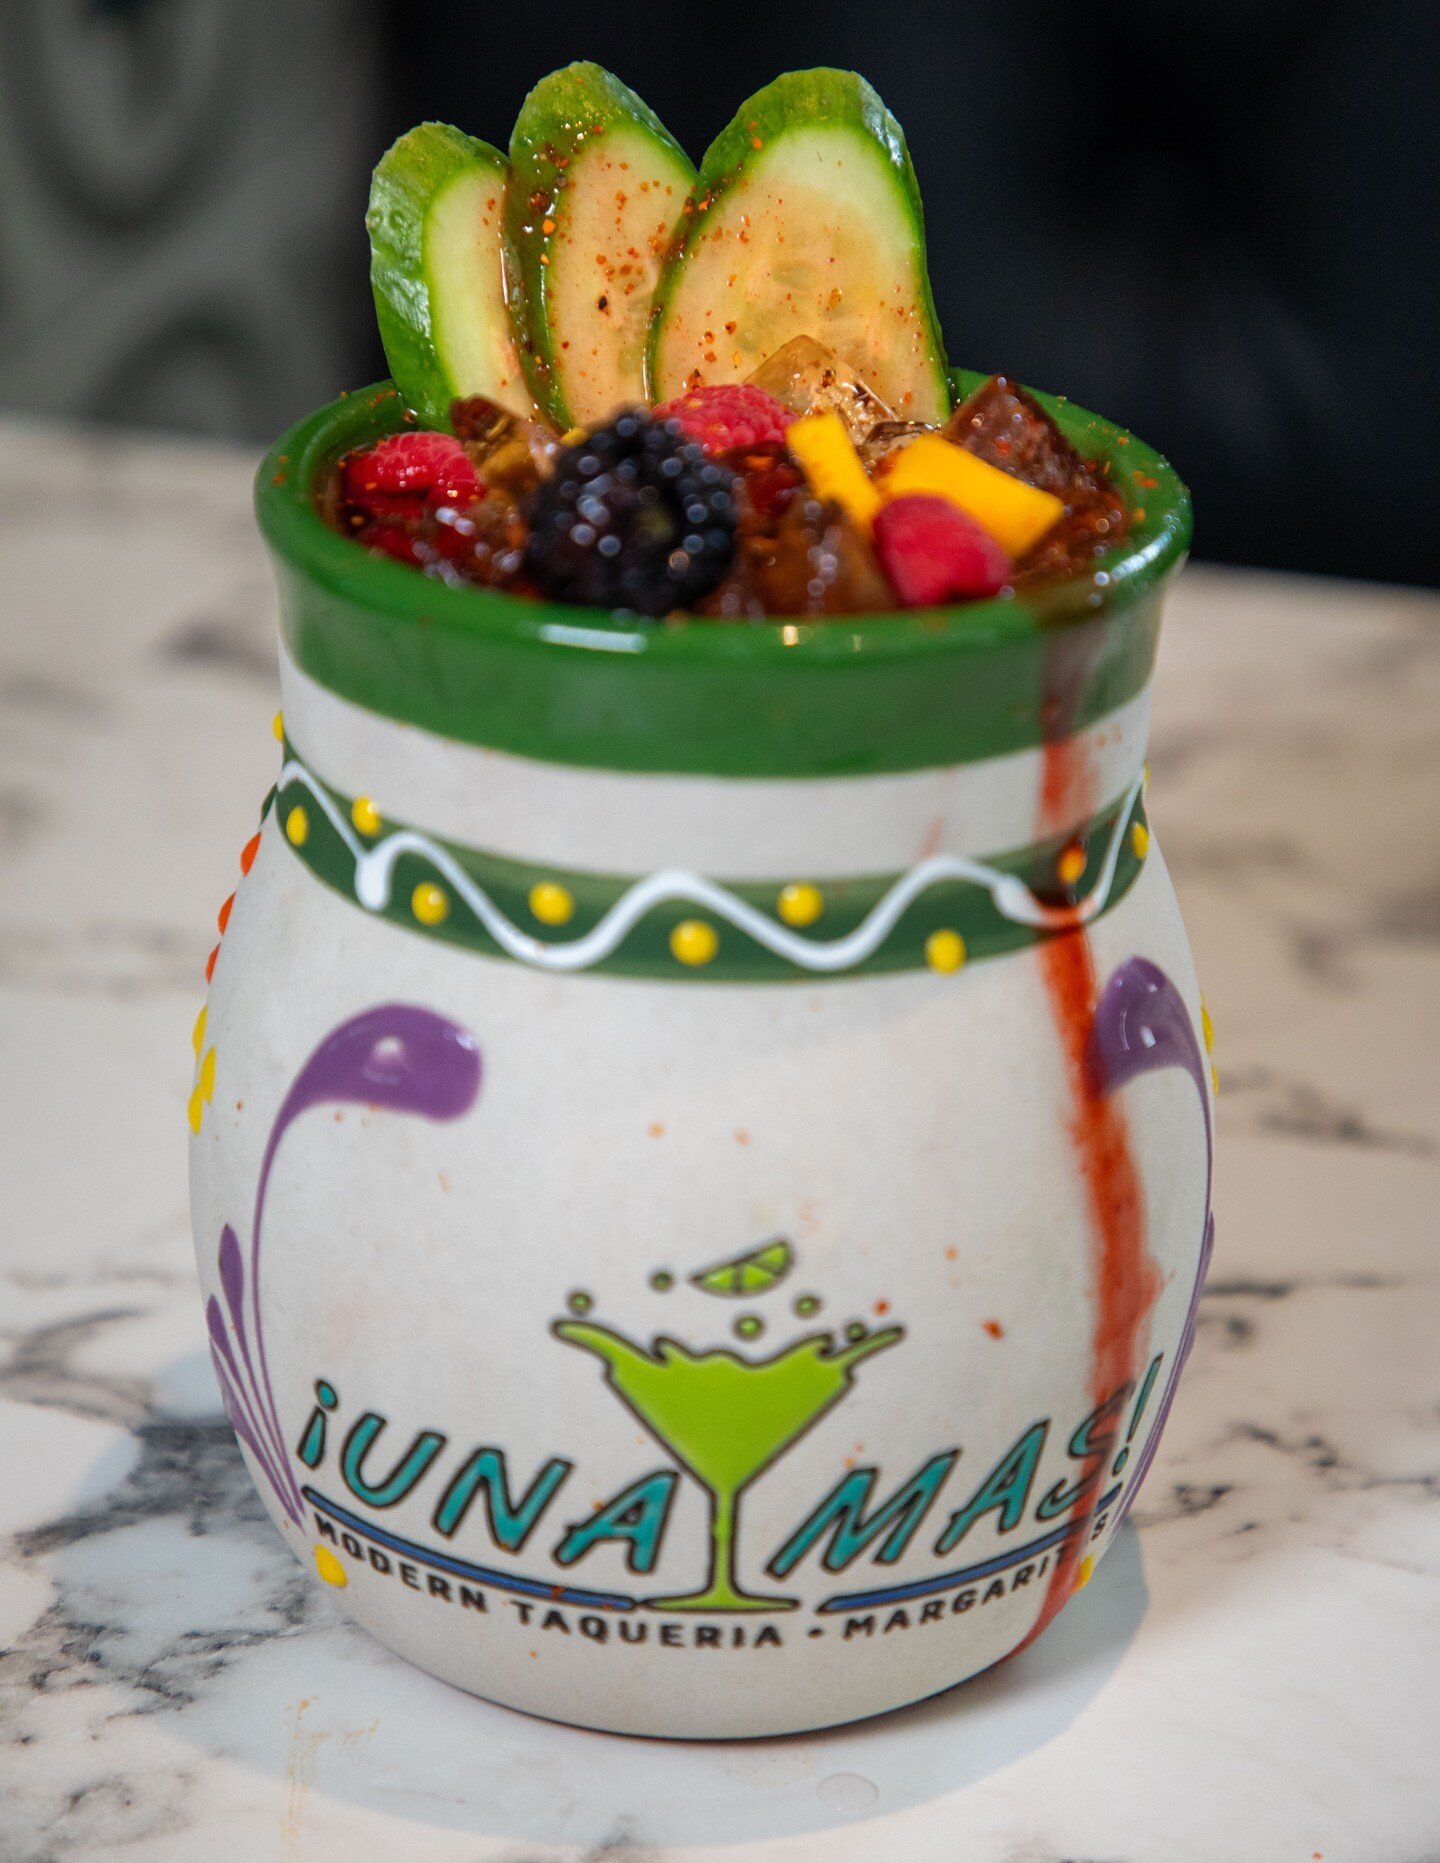 Every dish and drink will have you craving more and more 🤤

#UnaMas #asheboronc #comindamexicana #salisbury